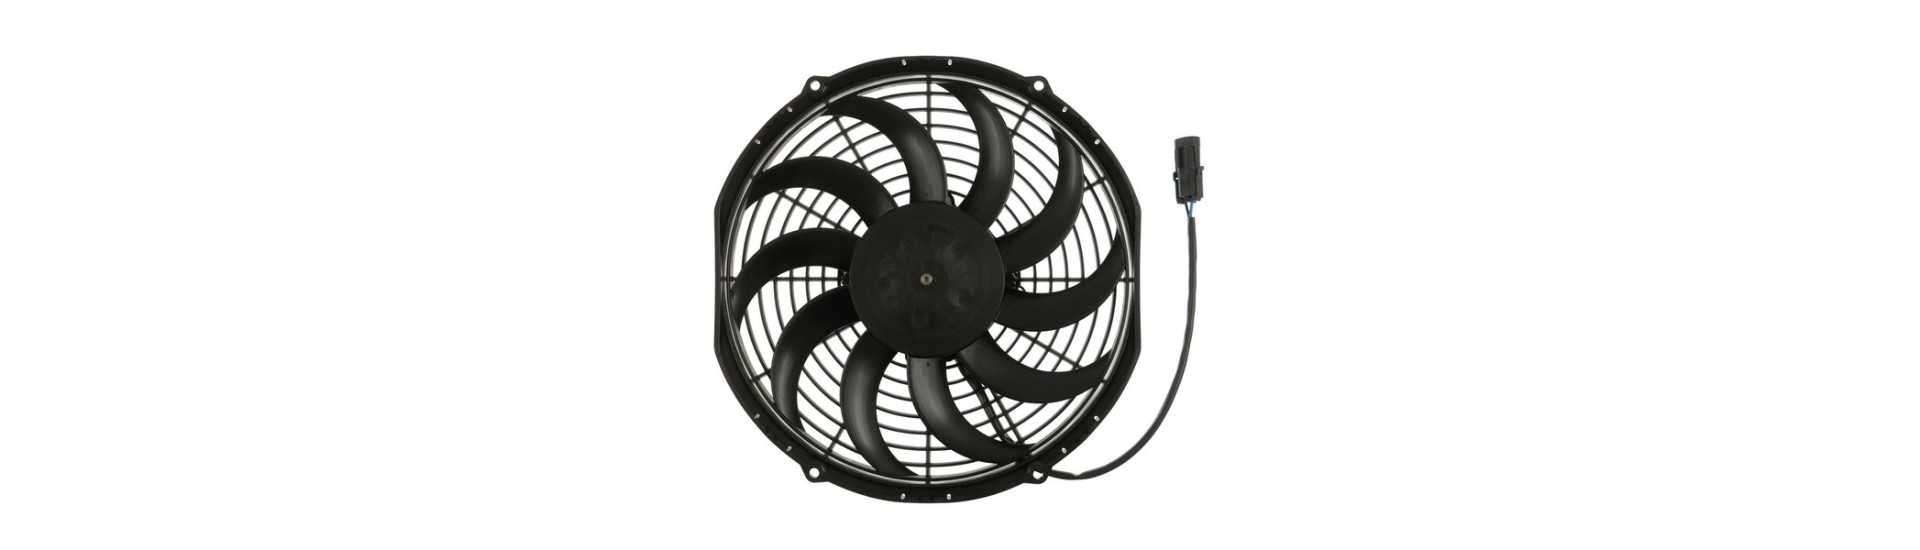 Air conditioning fan at the best price for car without a permit